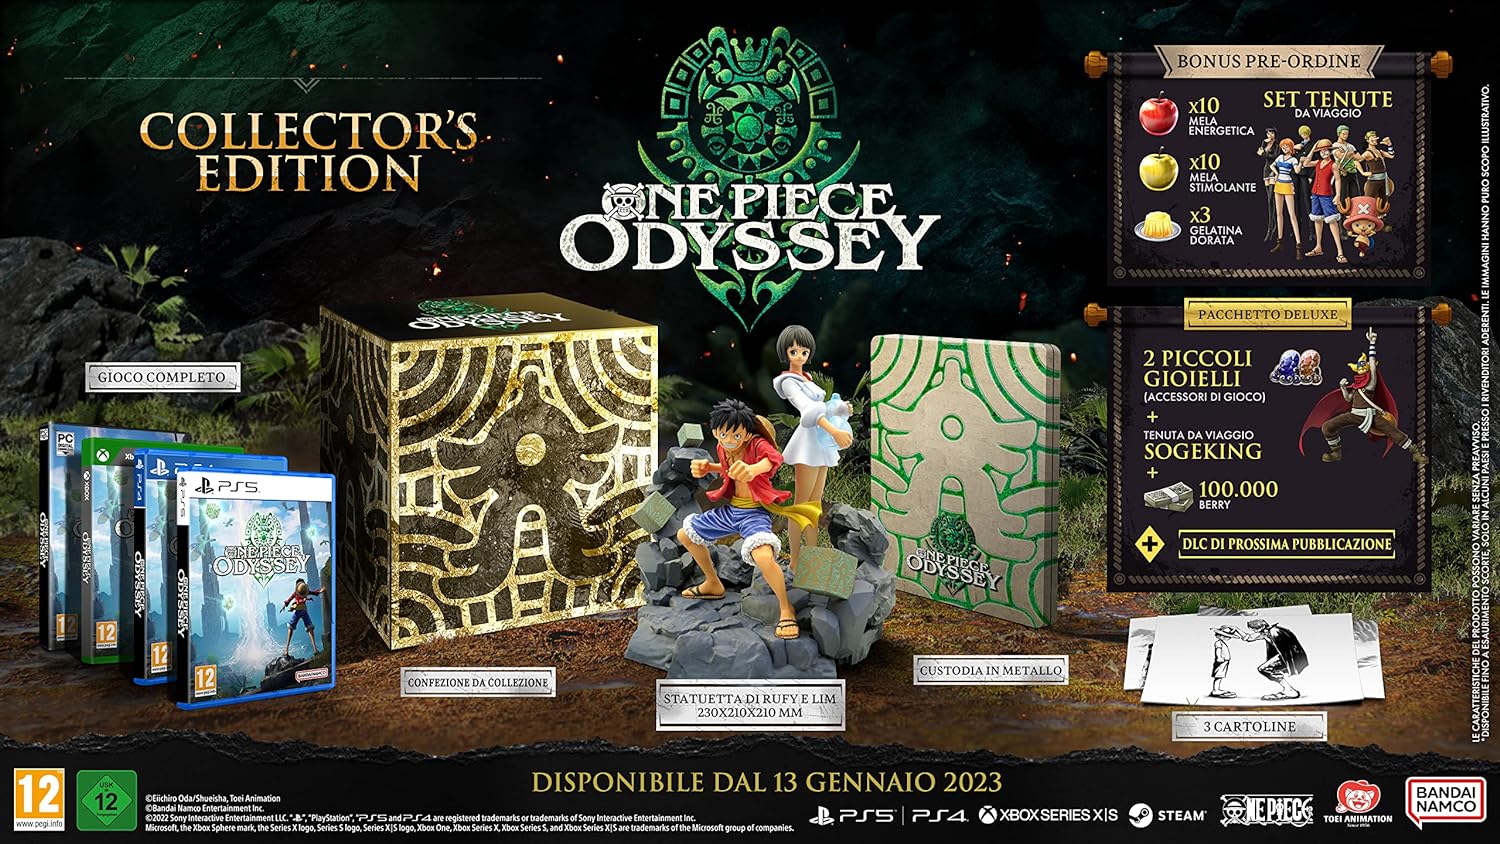 Edition deluxe One piece odyssey